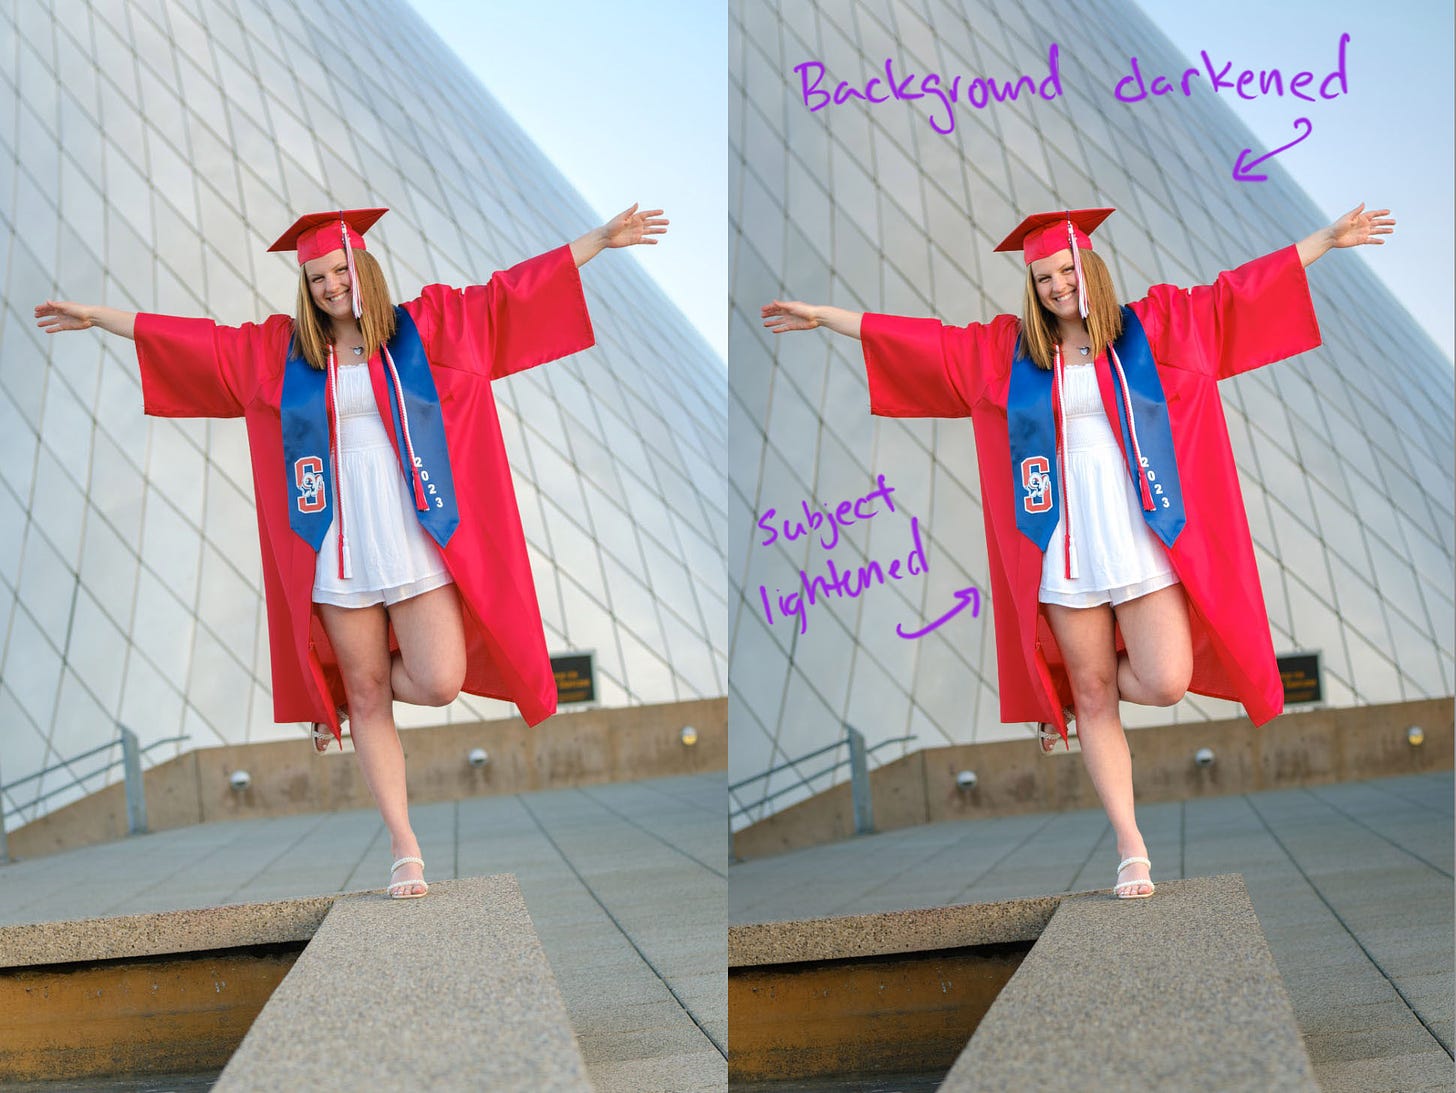 Two versions of the same image, one edited with text annotations indicating the background darkened and subject lightened. A young woman wearing a red cap and gown and a blue sash balances on one leg in front of the metal cone sculpture at the Museum of Glass. 